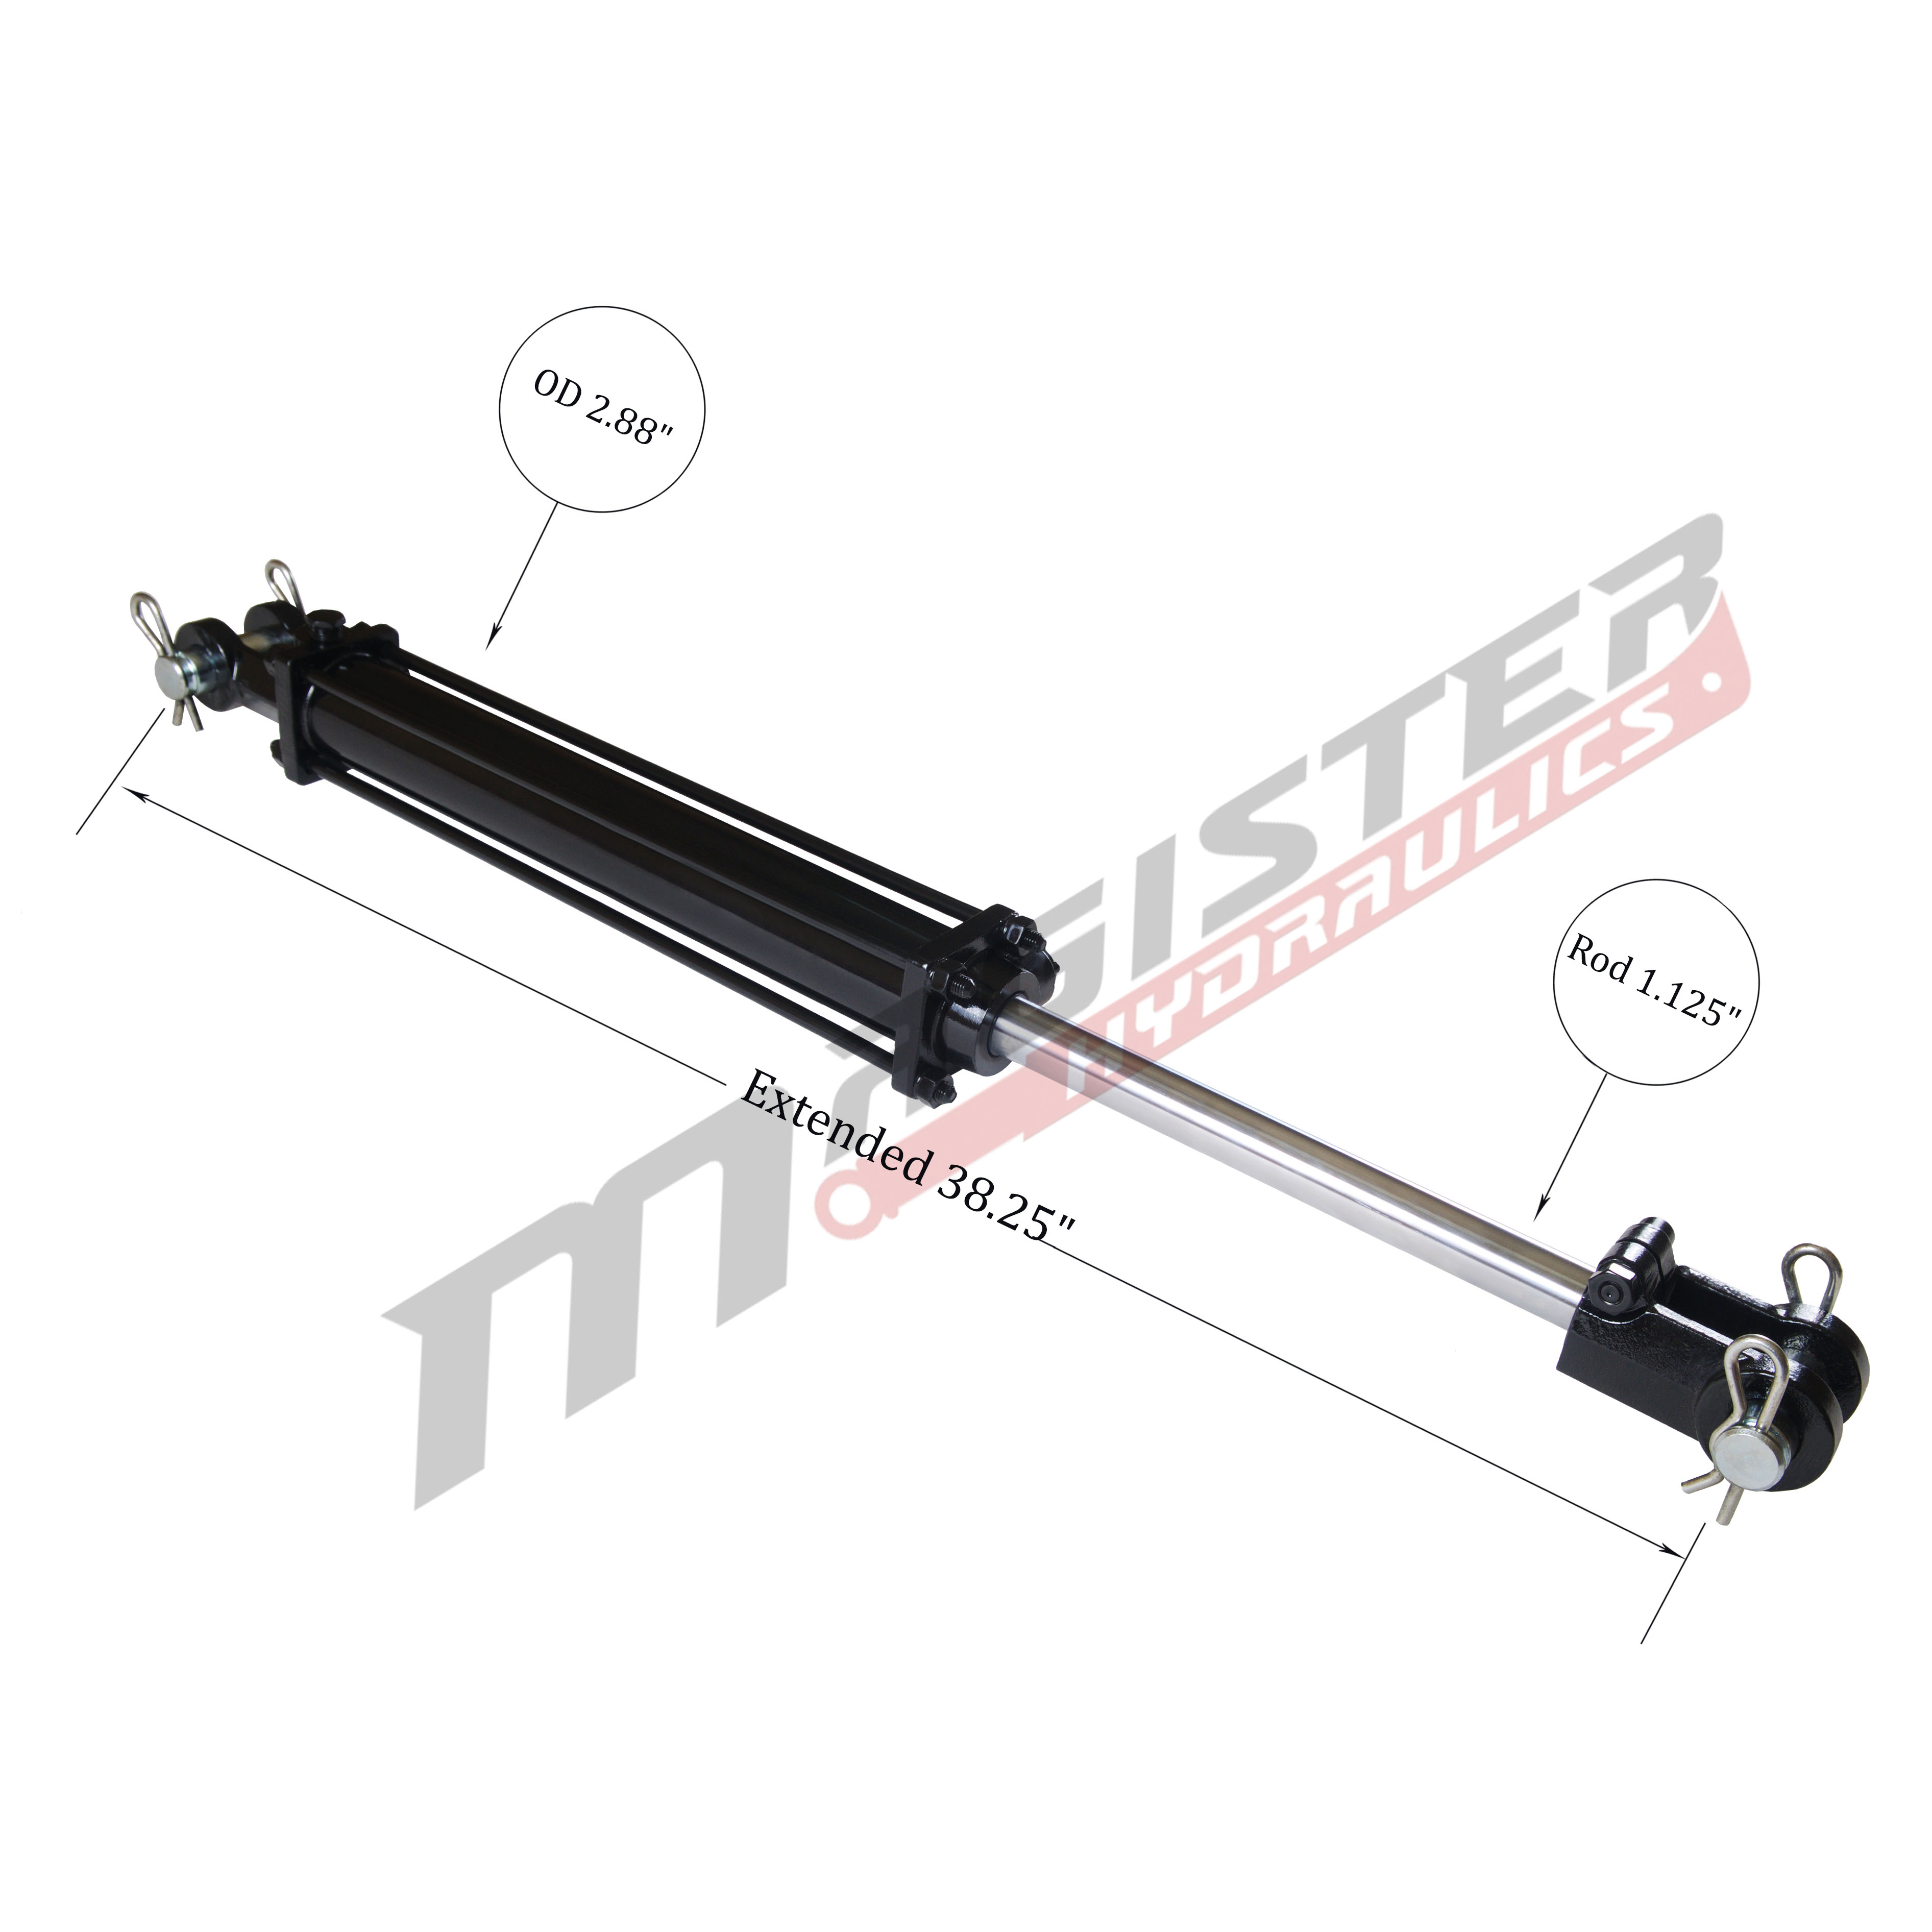 2.5 bore x 14 stroke hydraulic cylinder, tie rod double acting cylinder | Magister Hydraulics